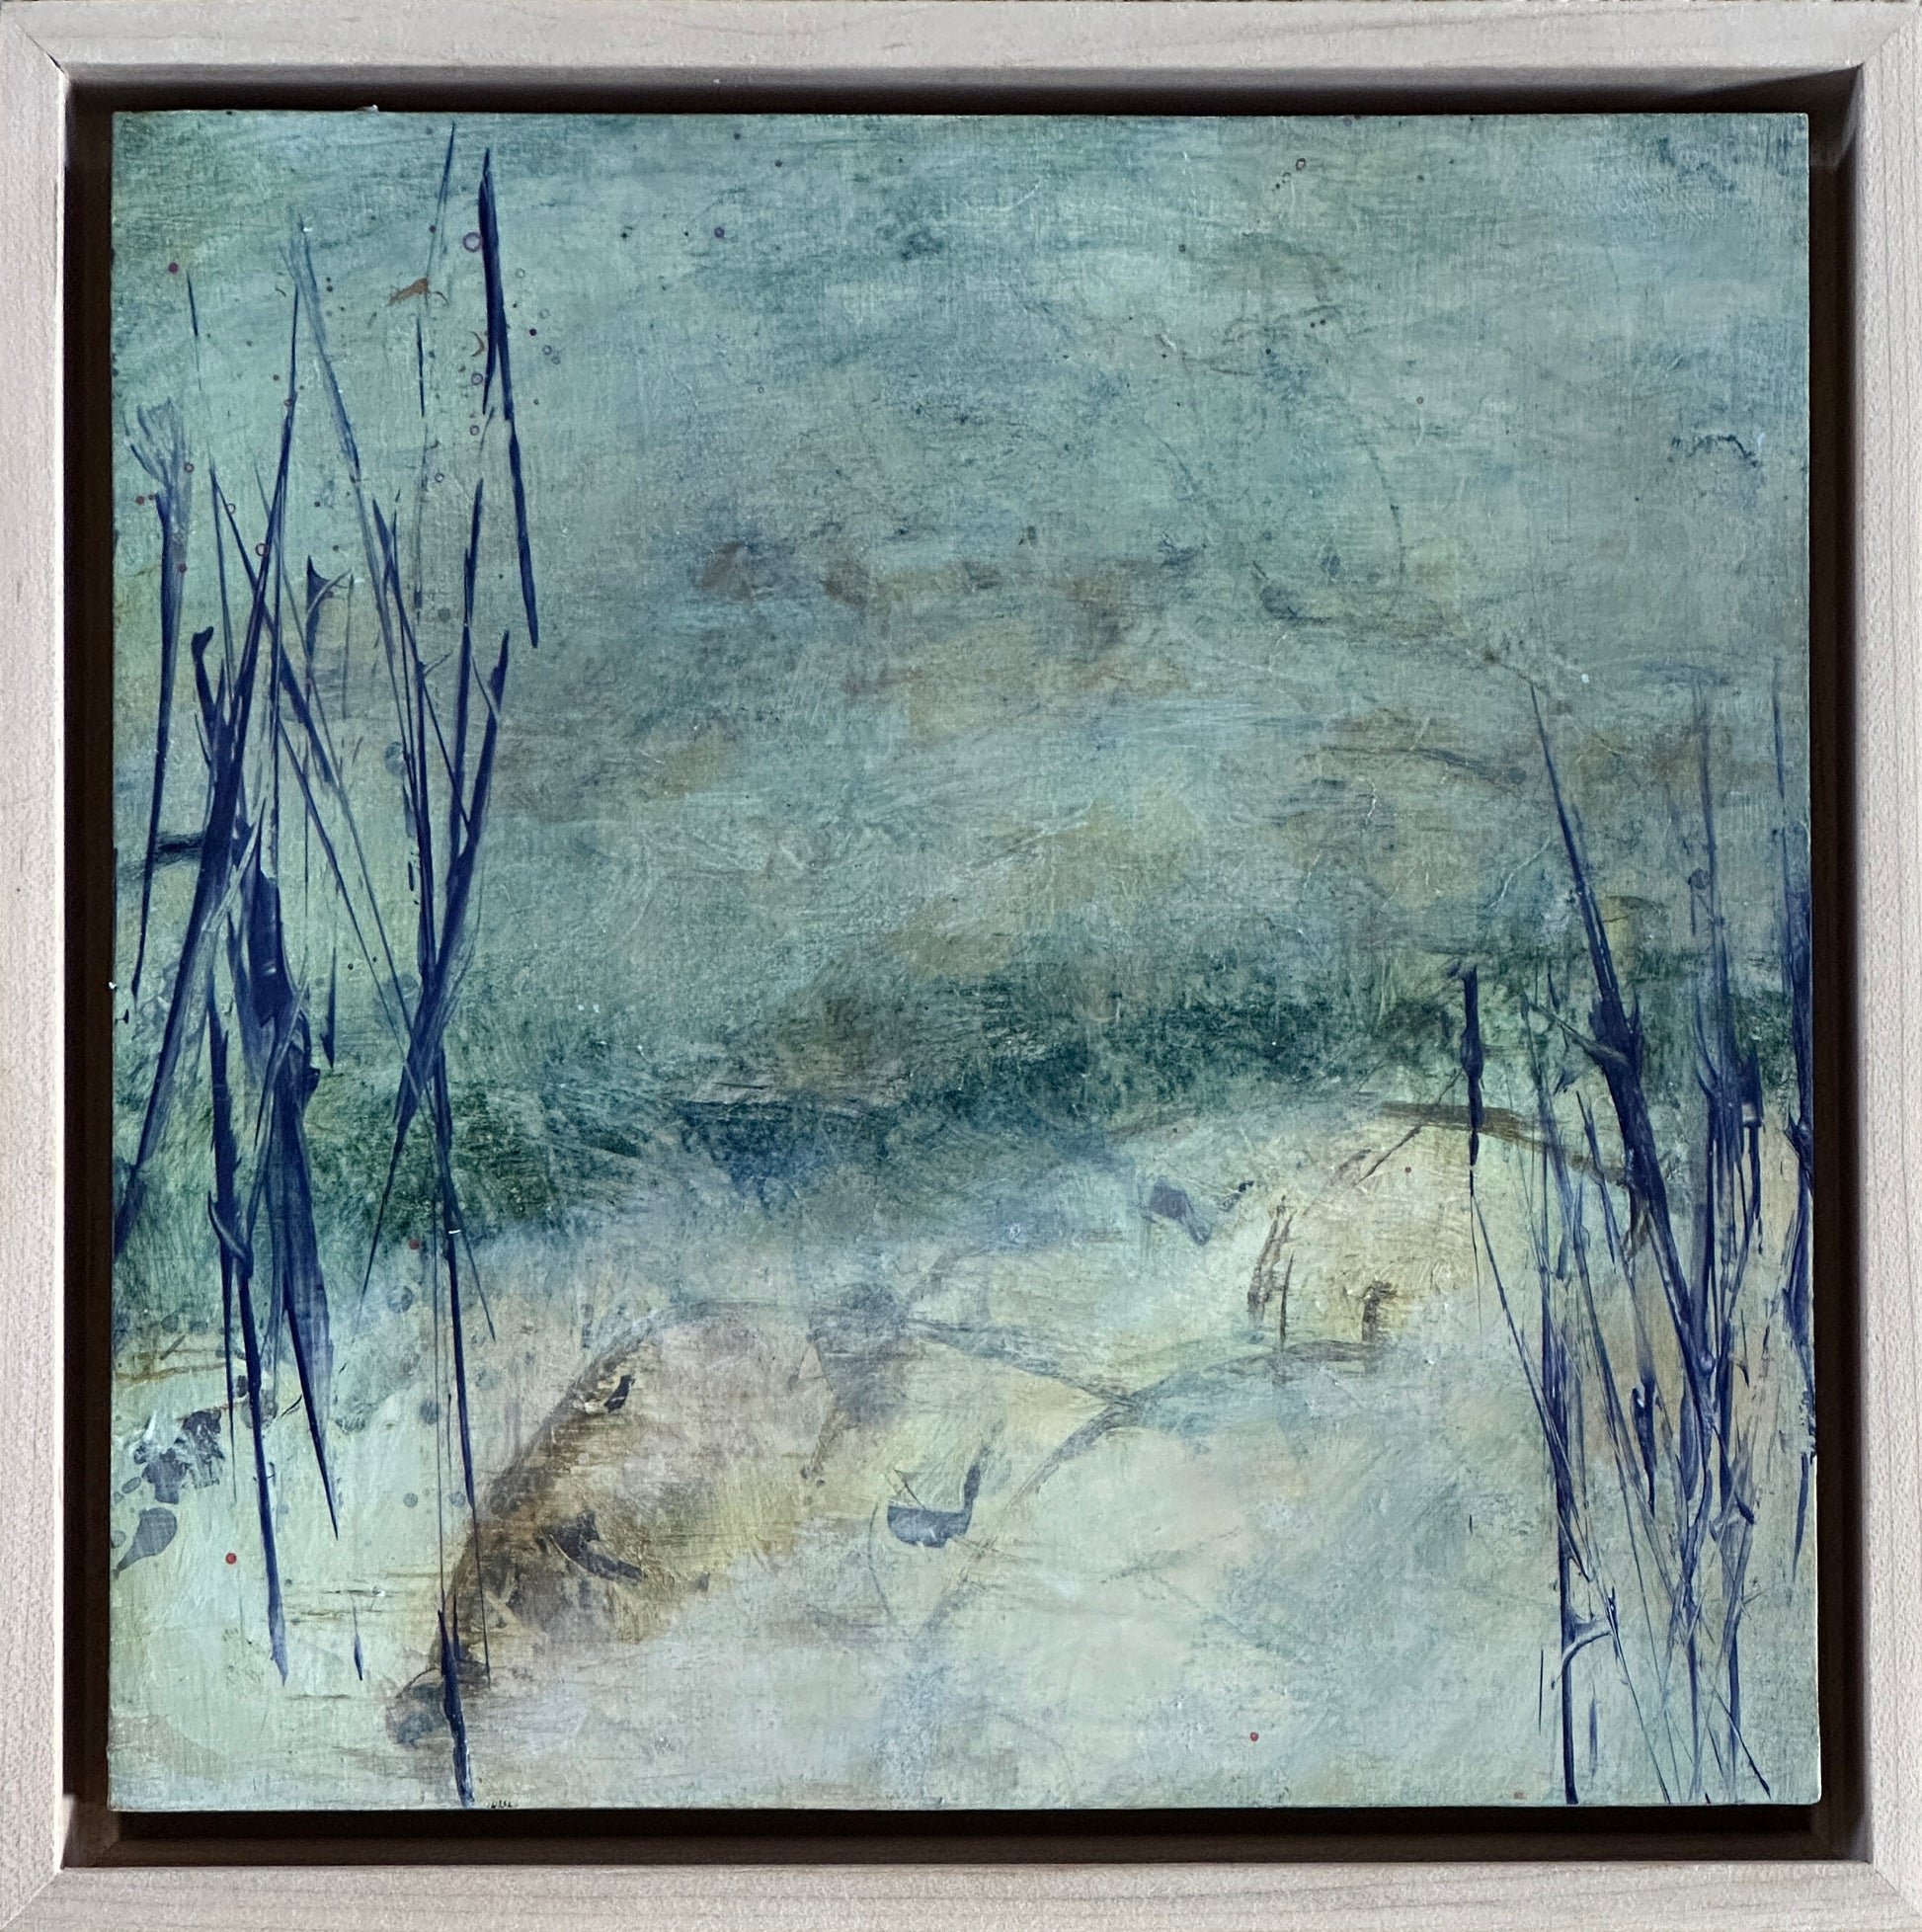 8 x 8 x 1.5-inch, framed, impression of water lapping over sand creating a gradual shift from water to sand, merging the two. Acrylic painting on cradled panel with natural wood frame.  By Cumming, GA artist, Juanita Bellavance. Part of our 25 Days of Minis 2022 collection.  Collect them all!